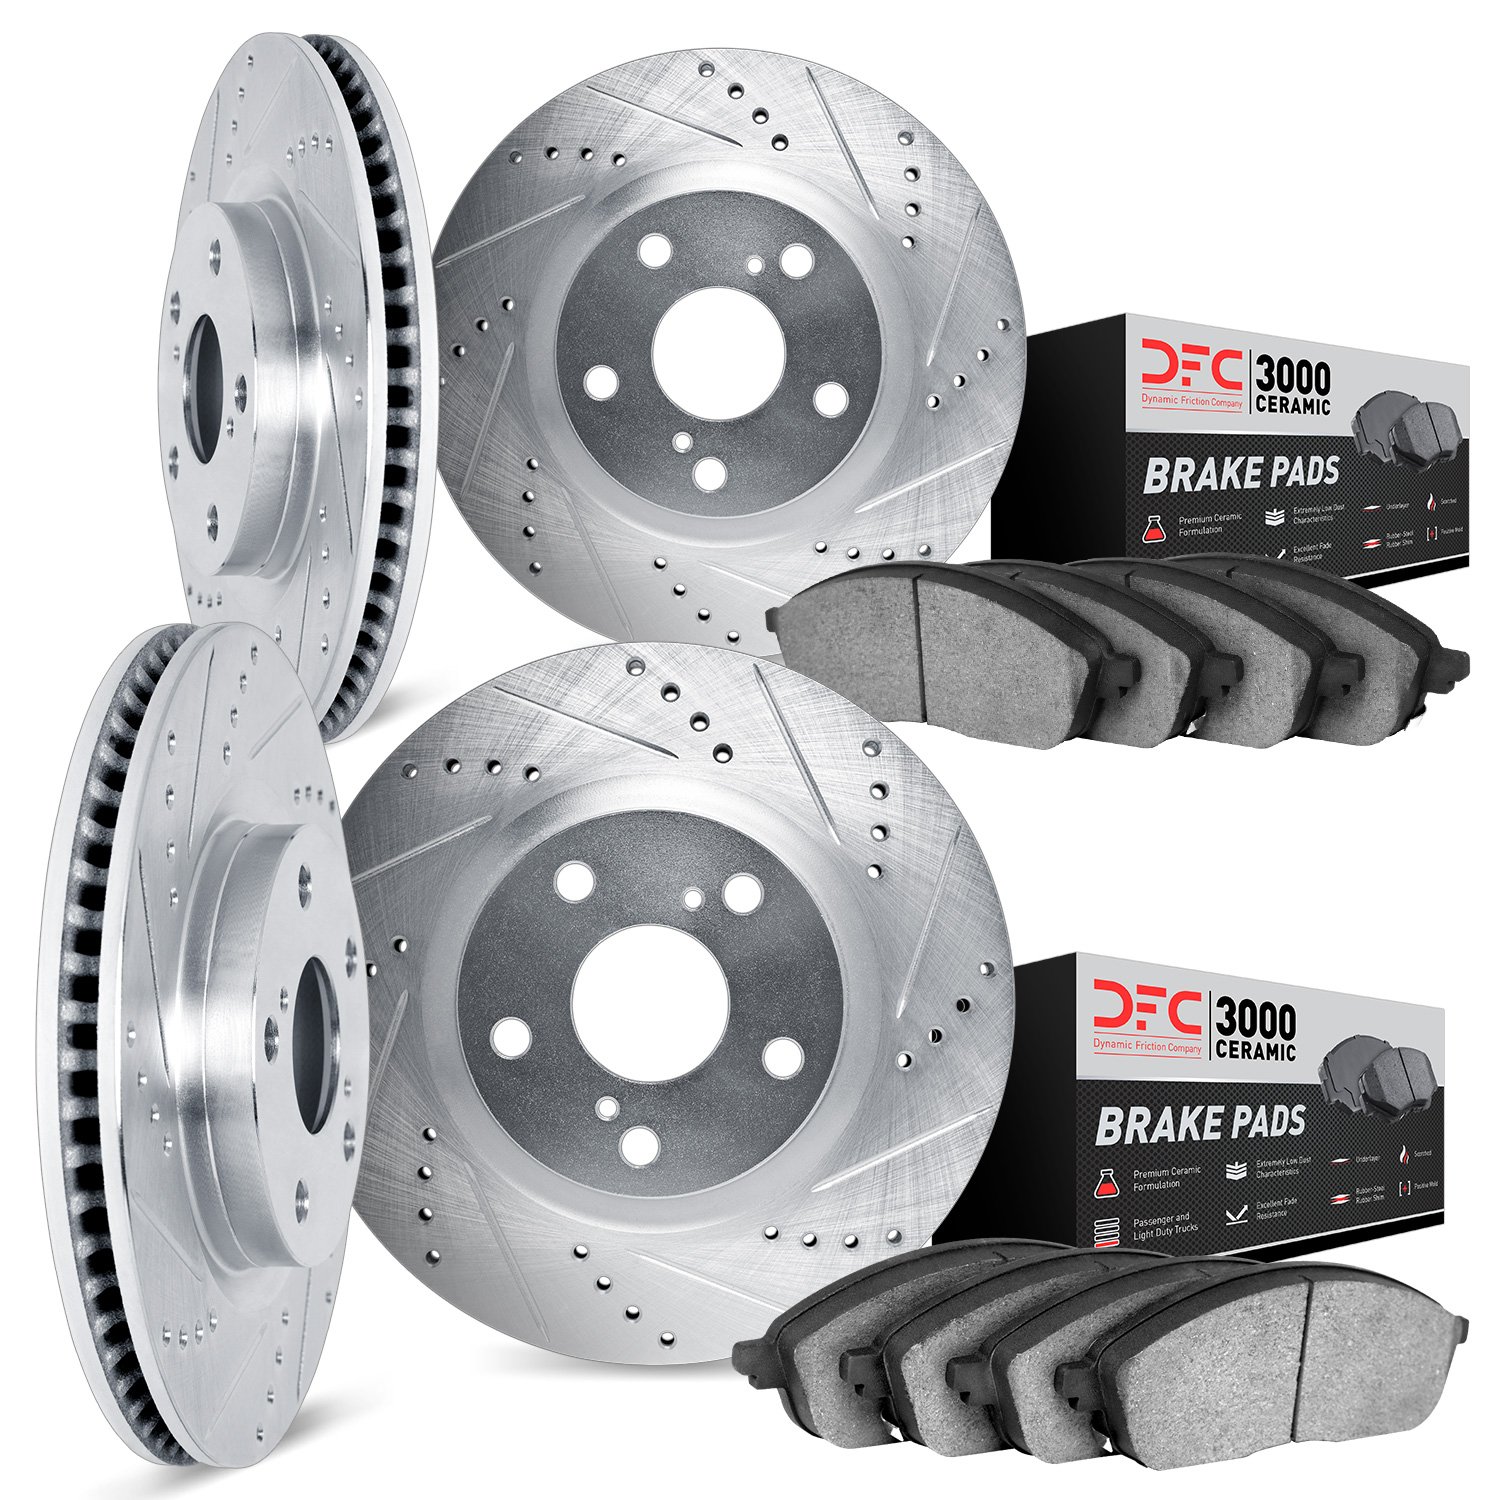 7304-67079 Drilled/Slotted Brake Rotor with 3000-Series Ceramic Brake Pads Kit [Silver], Fits Select Multiple Makes/Models, Posi